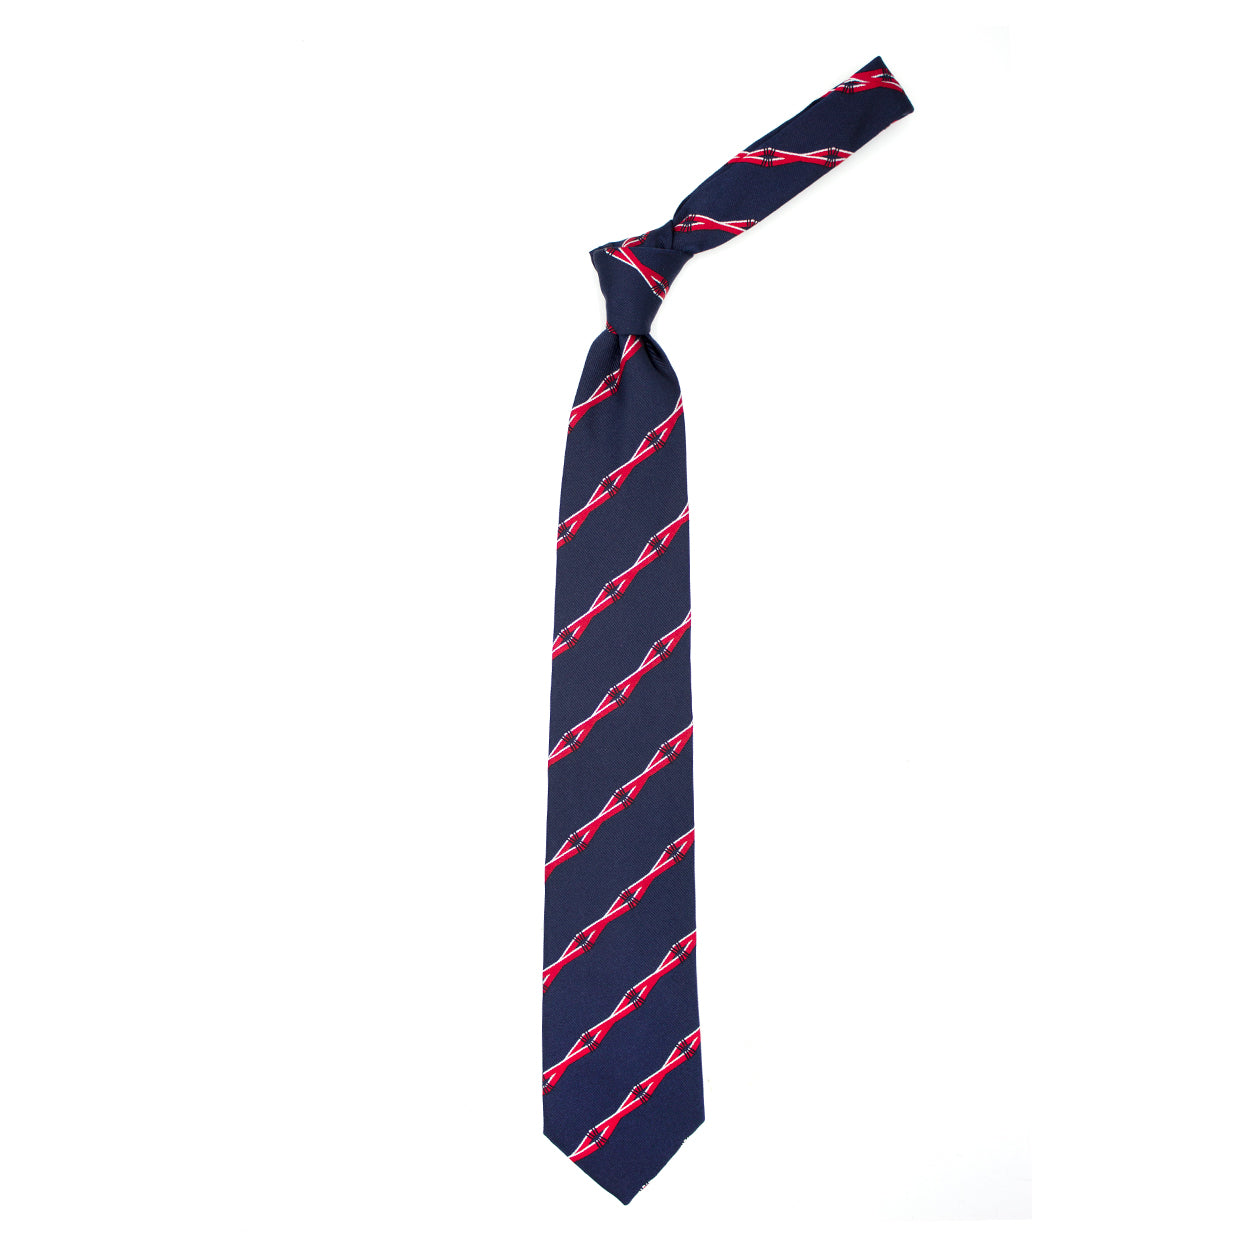 Blue tie with red stripes